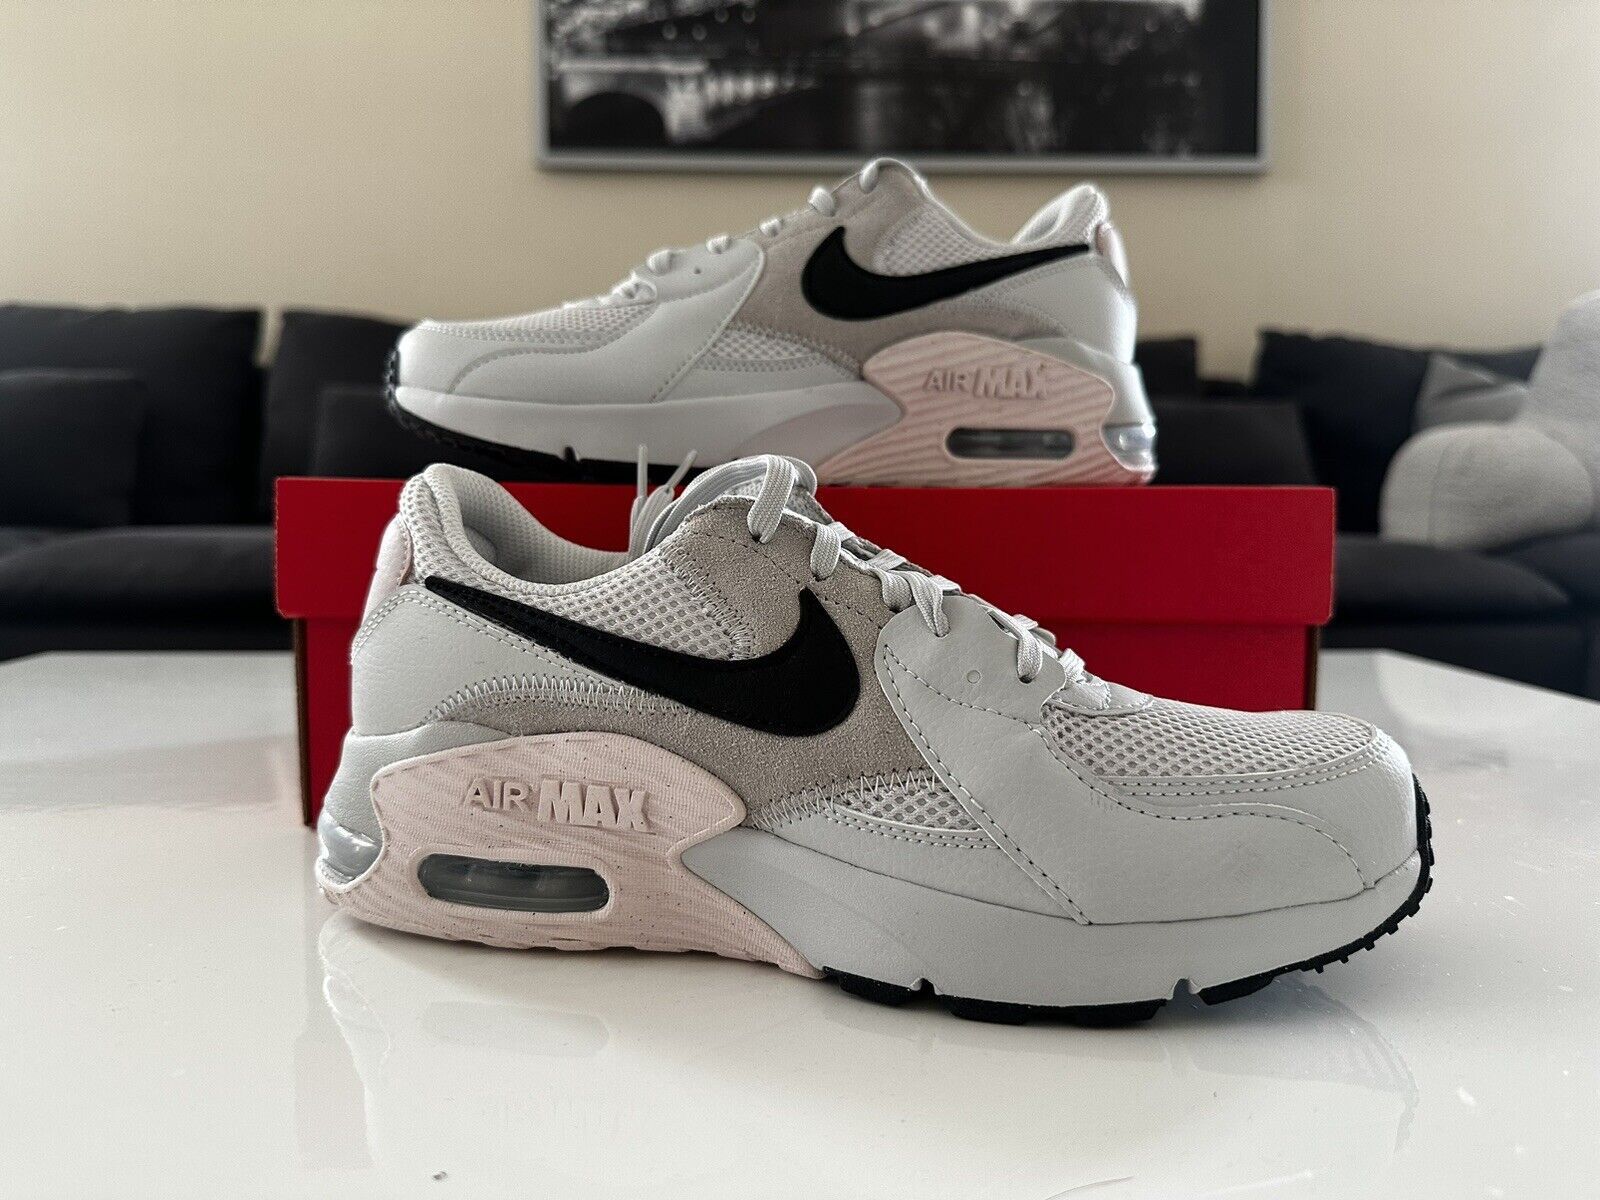 Inmuebles apenas banjo NEW Nike Women Air Max Excee Running Shoes - Gray Black Rose Pink - Size 10  for Sale in Irwindale, CA - OfferUp